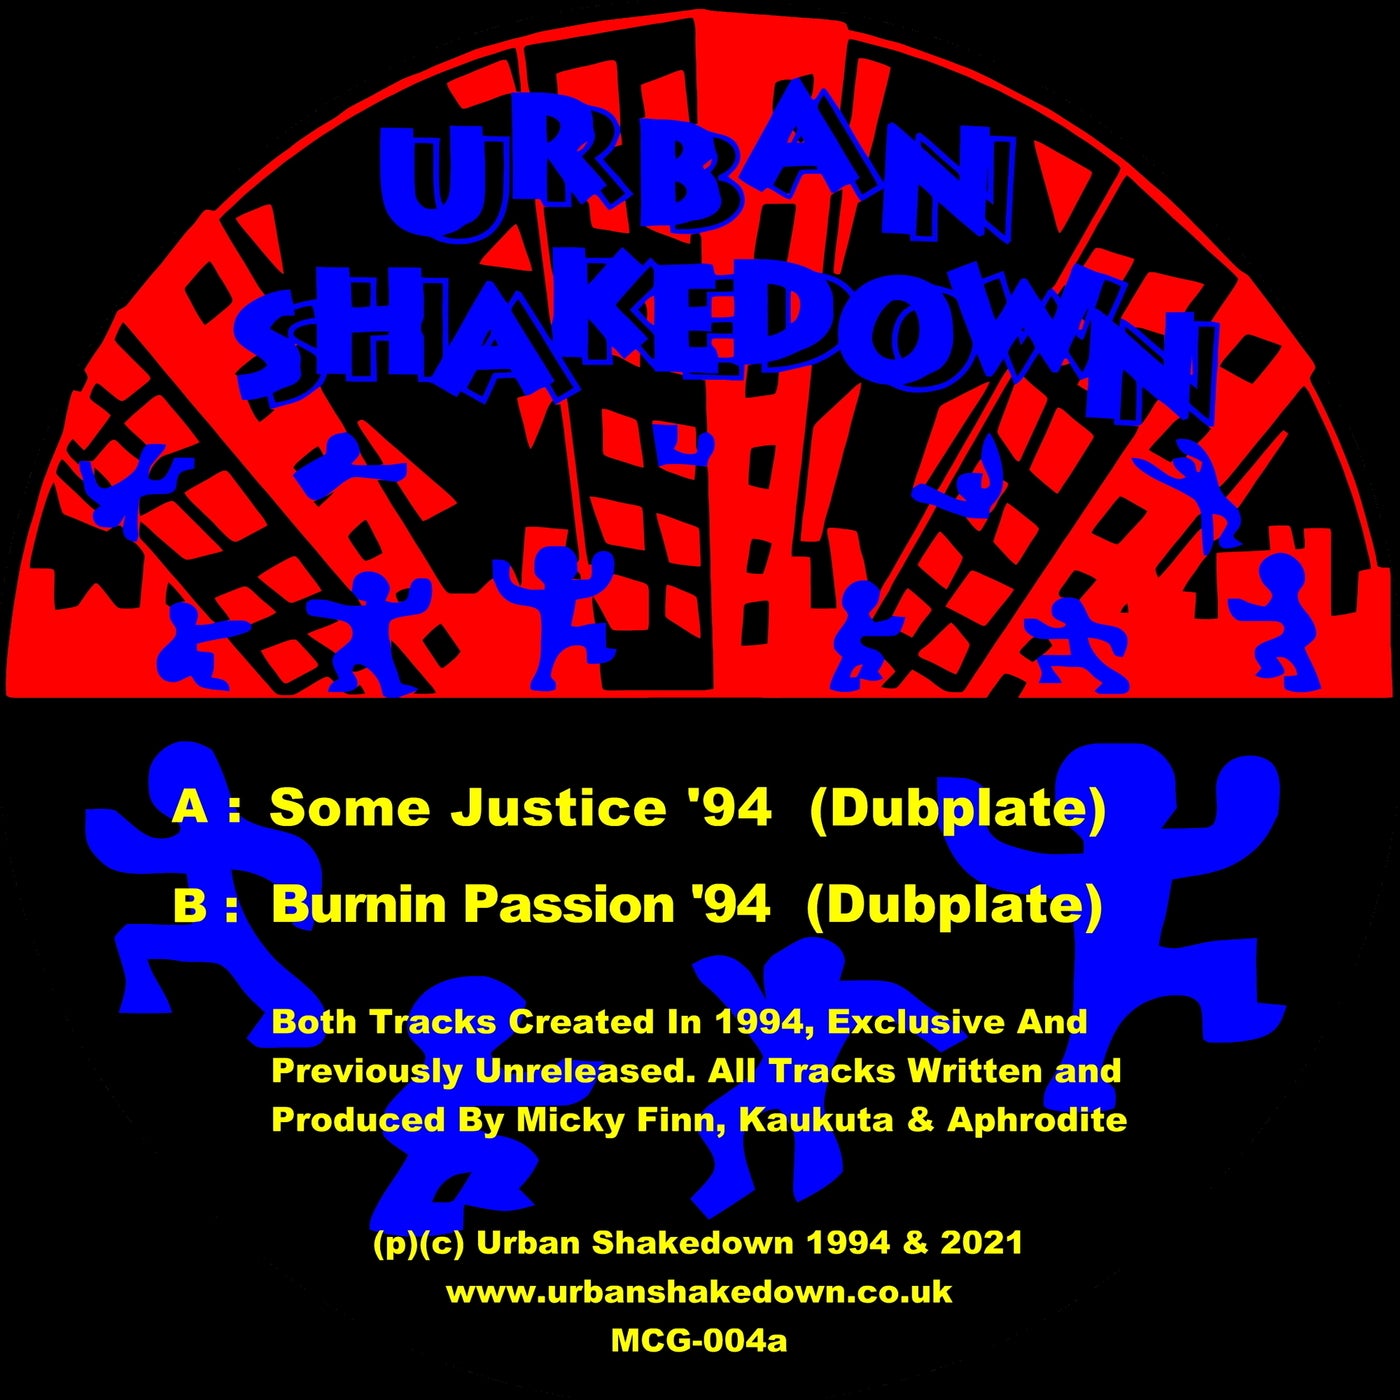 Some Justice / Burning Passion / The 1994 Dubplates